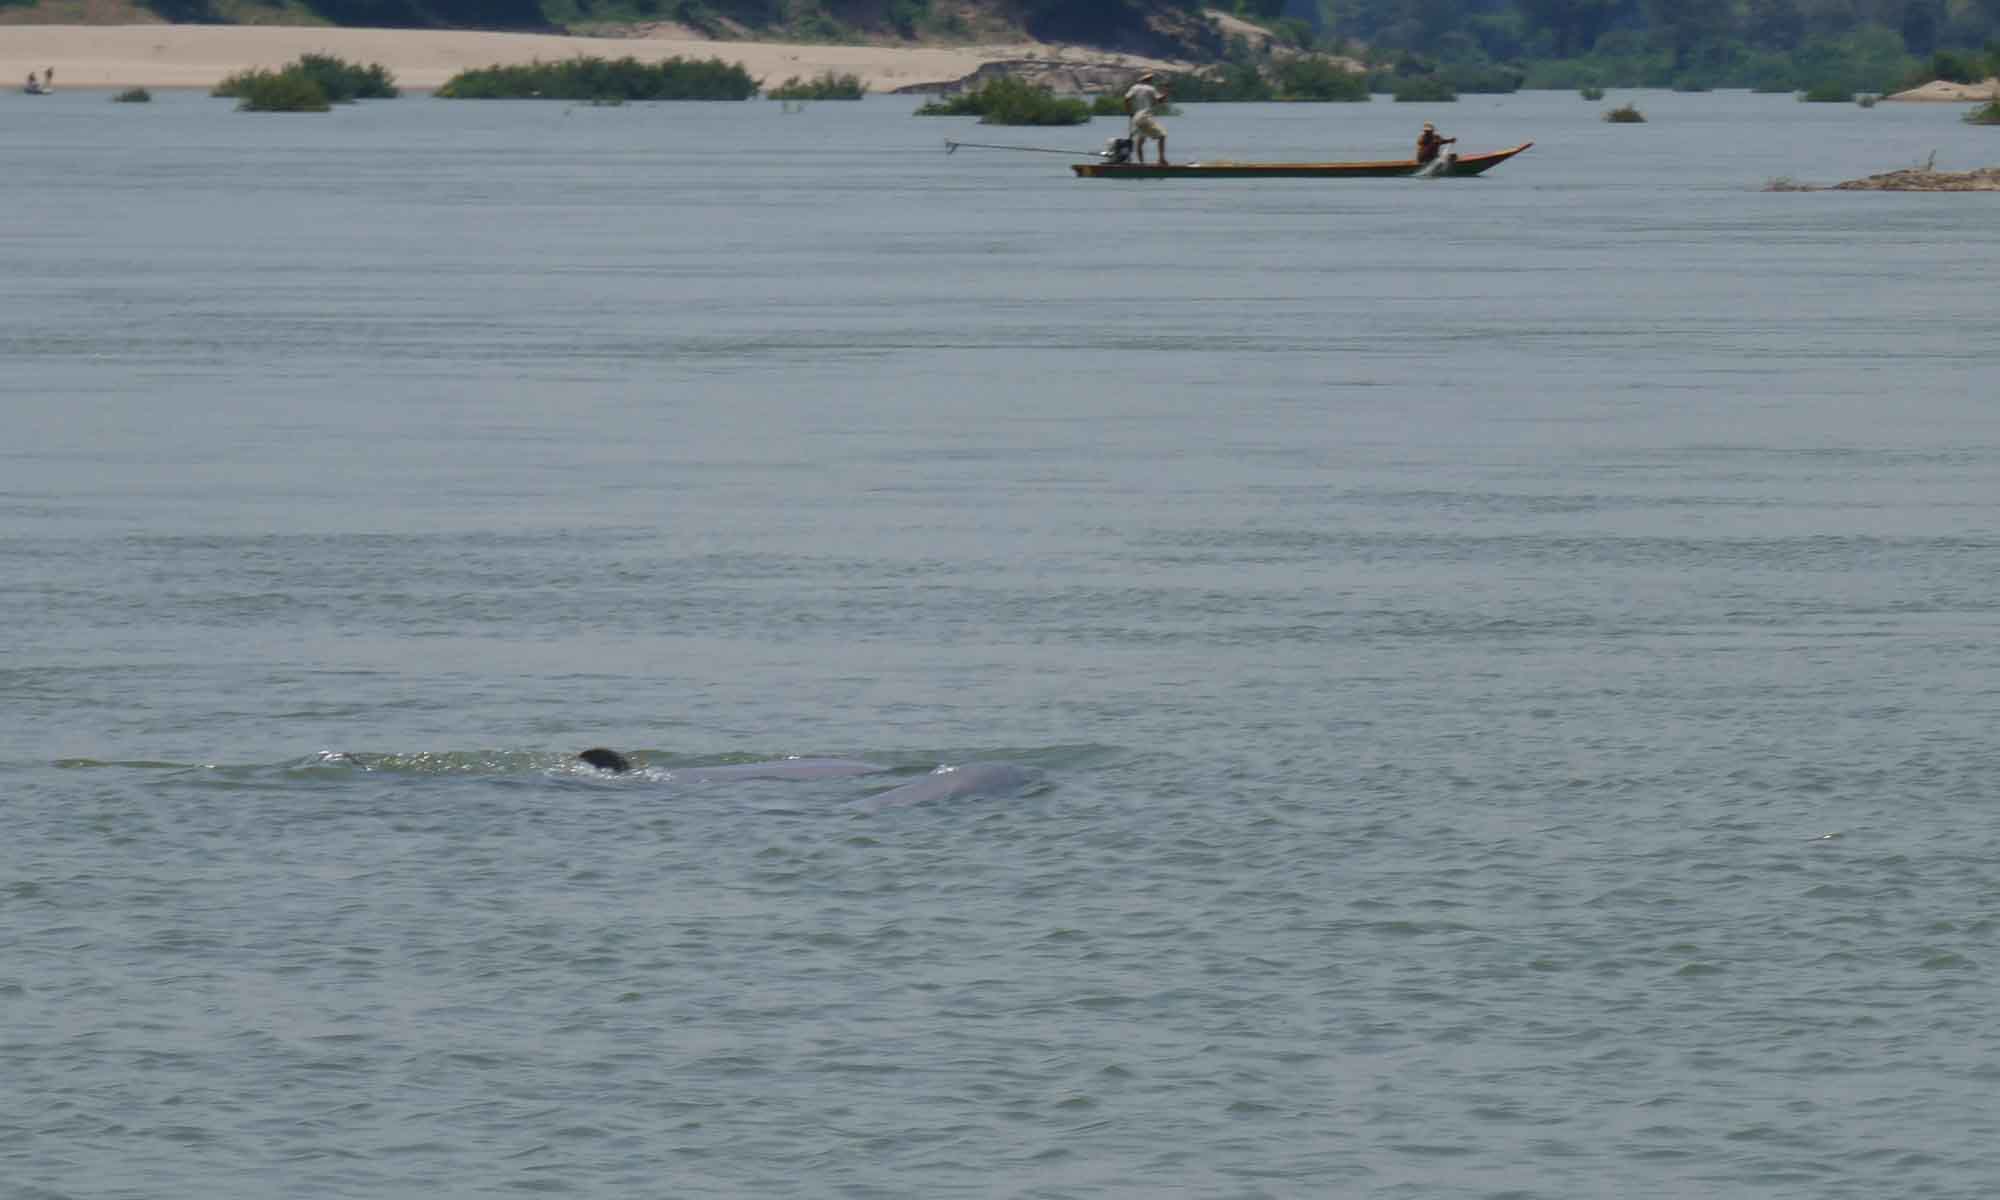 Two Irrawaddy dolphins!!